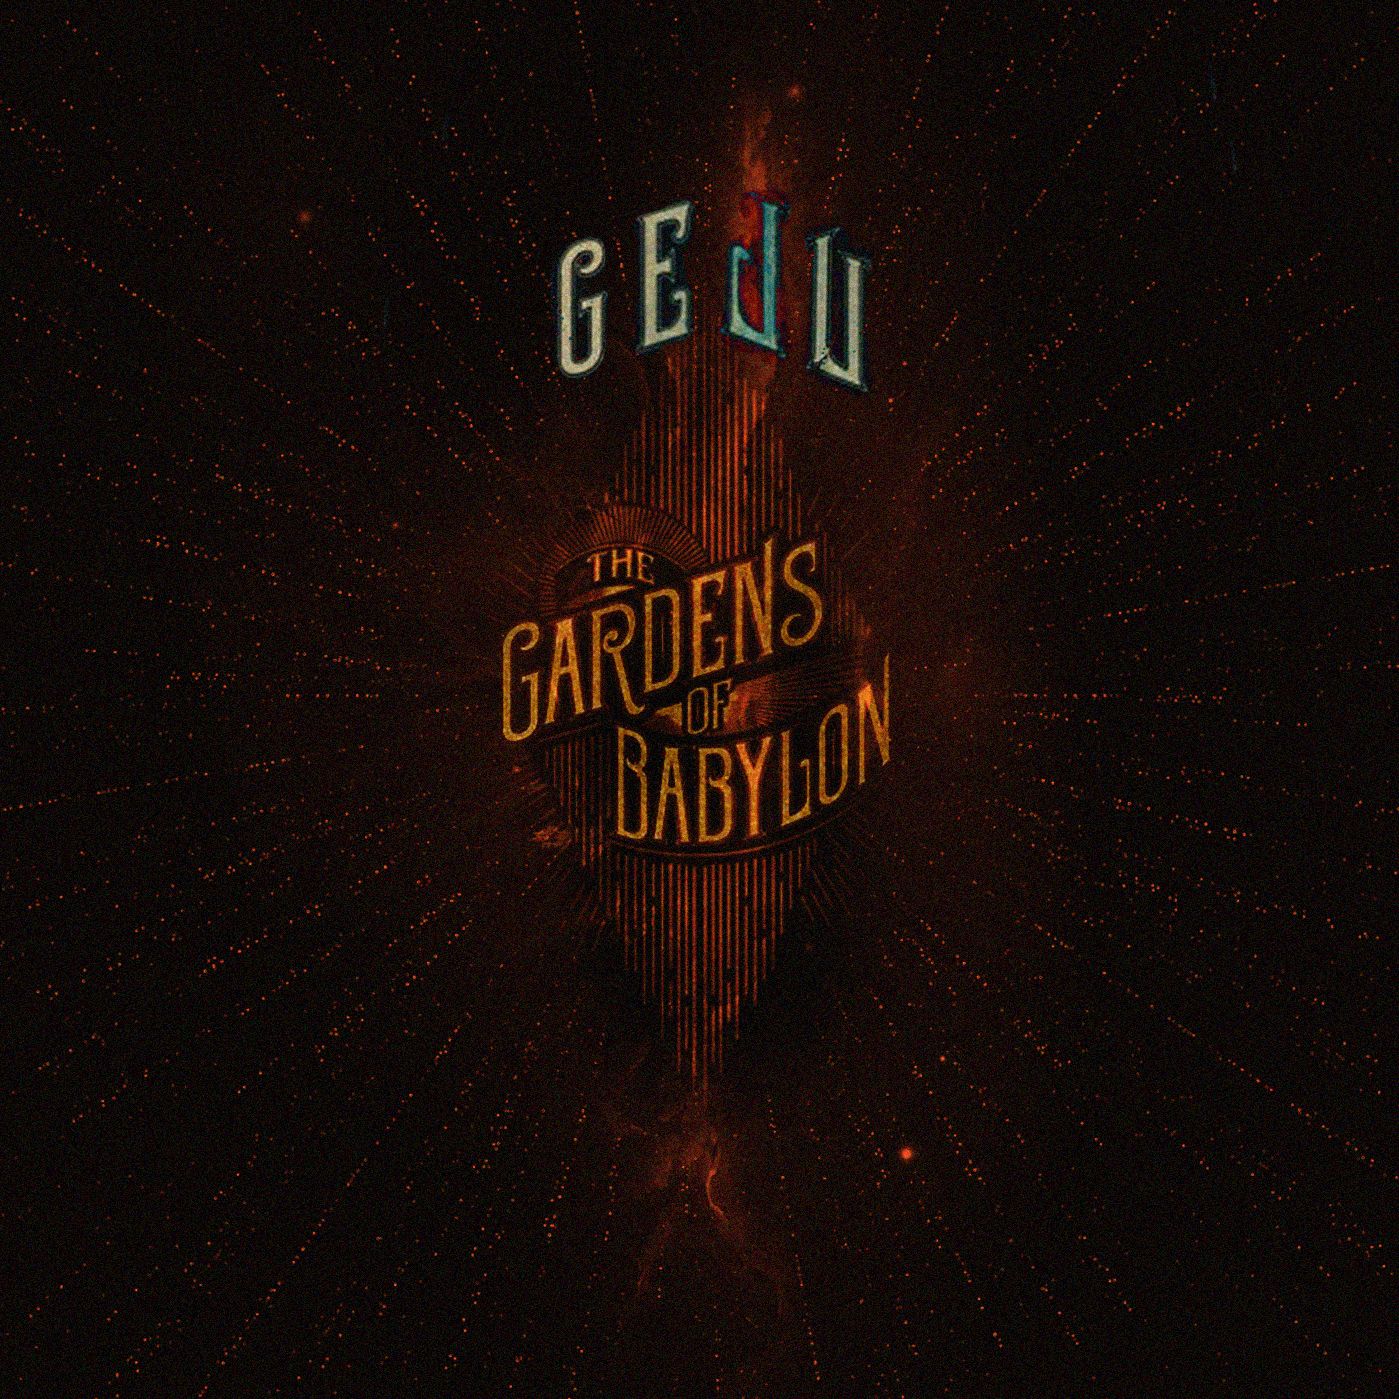 Descarca The Seekers of Light Babylon at ADE 2021 - Geju